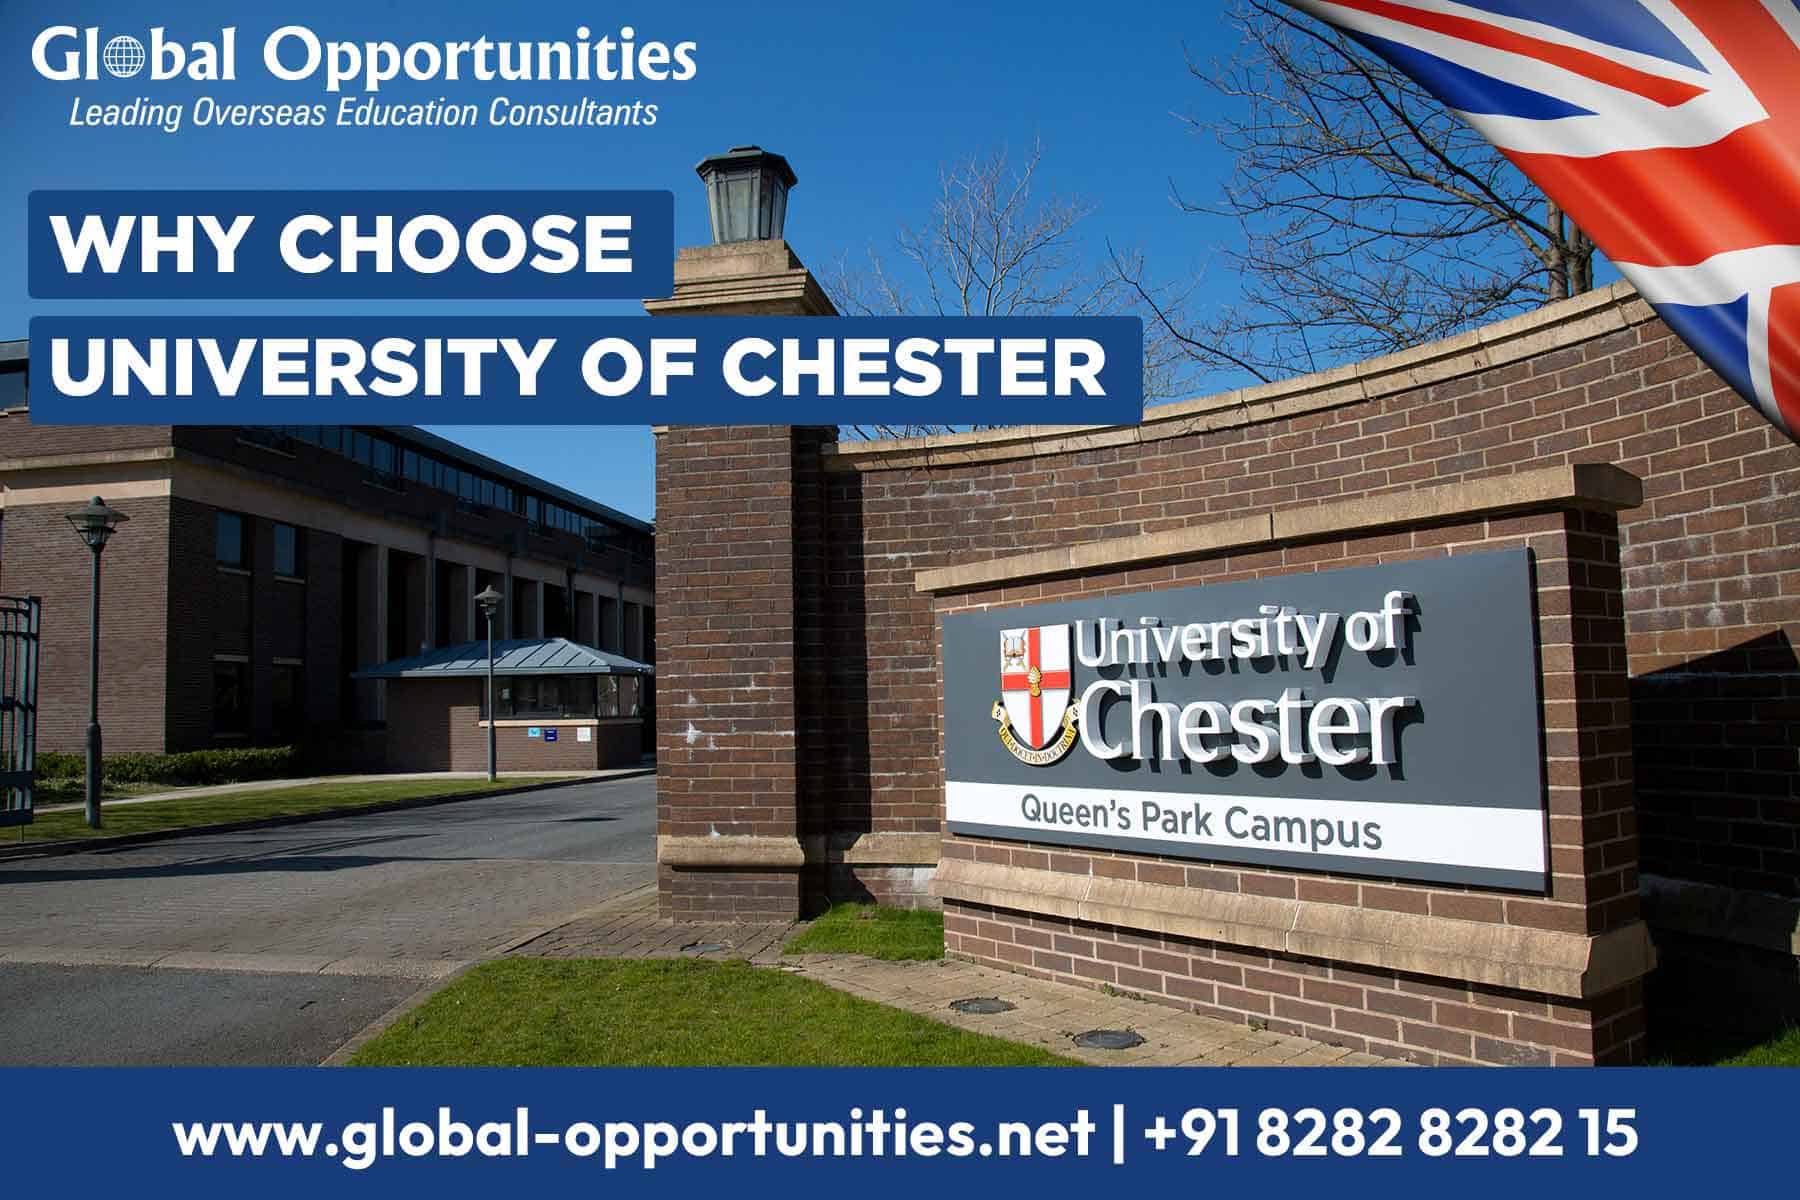 Why Choose University of Chester?